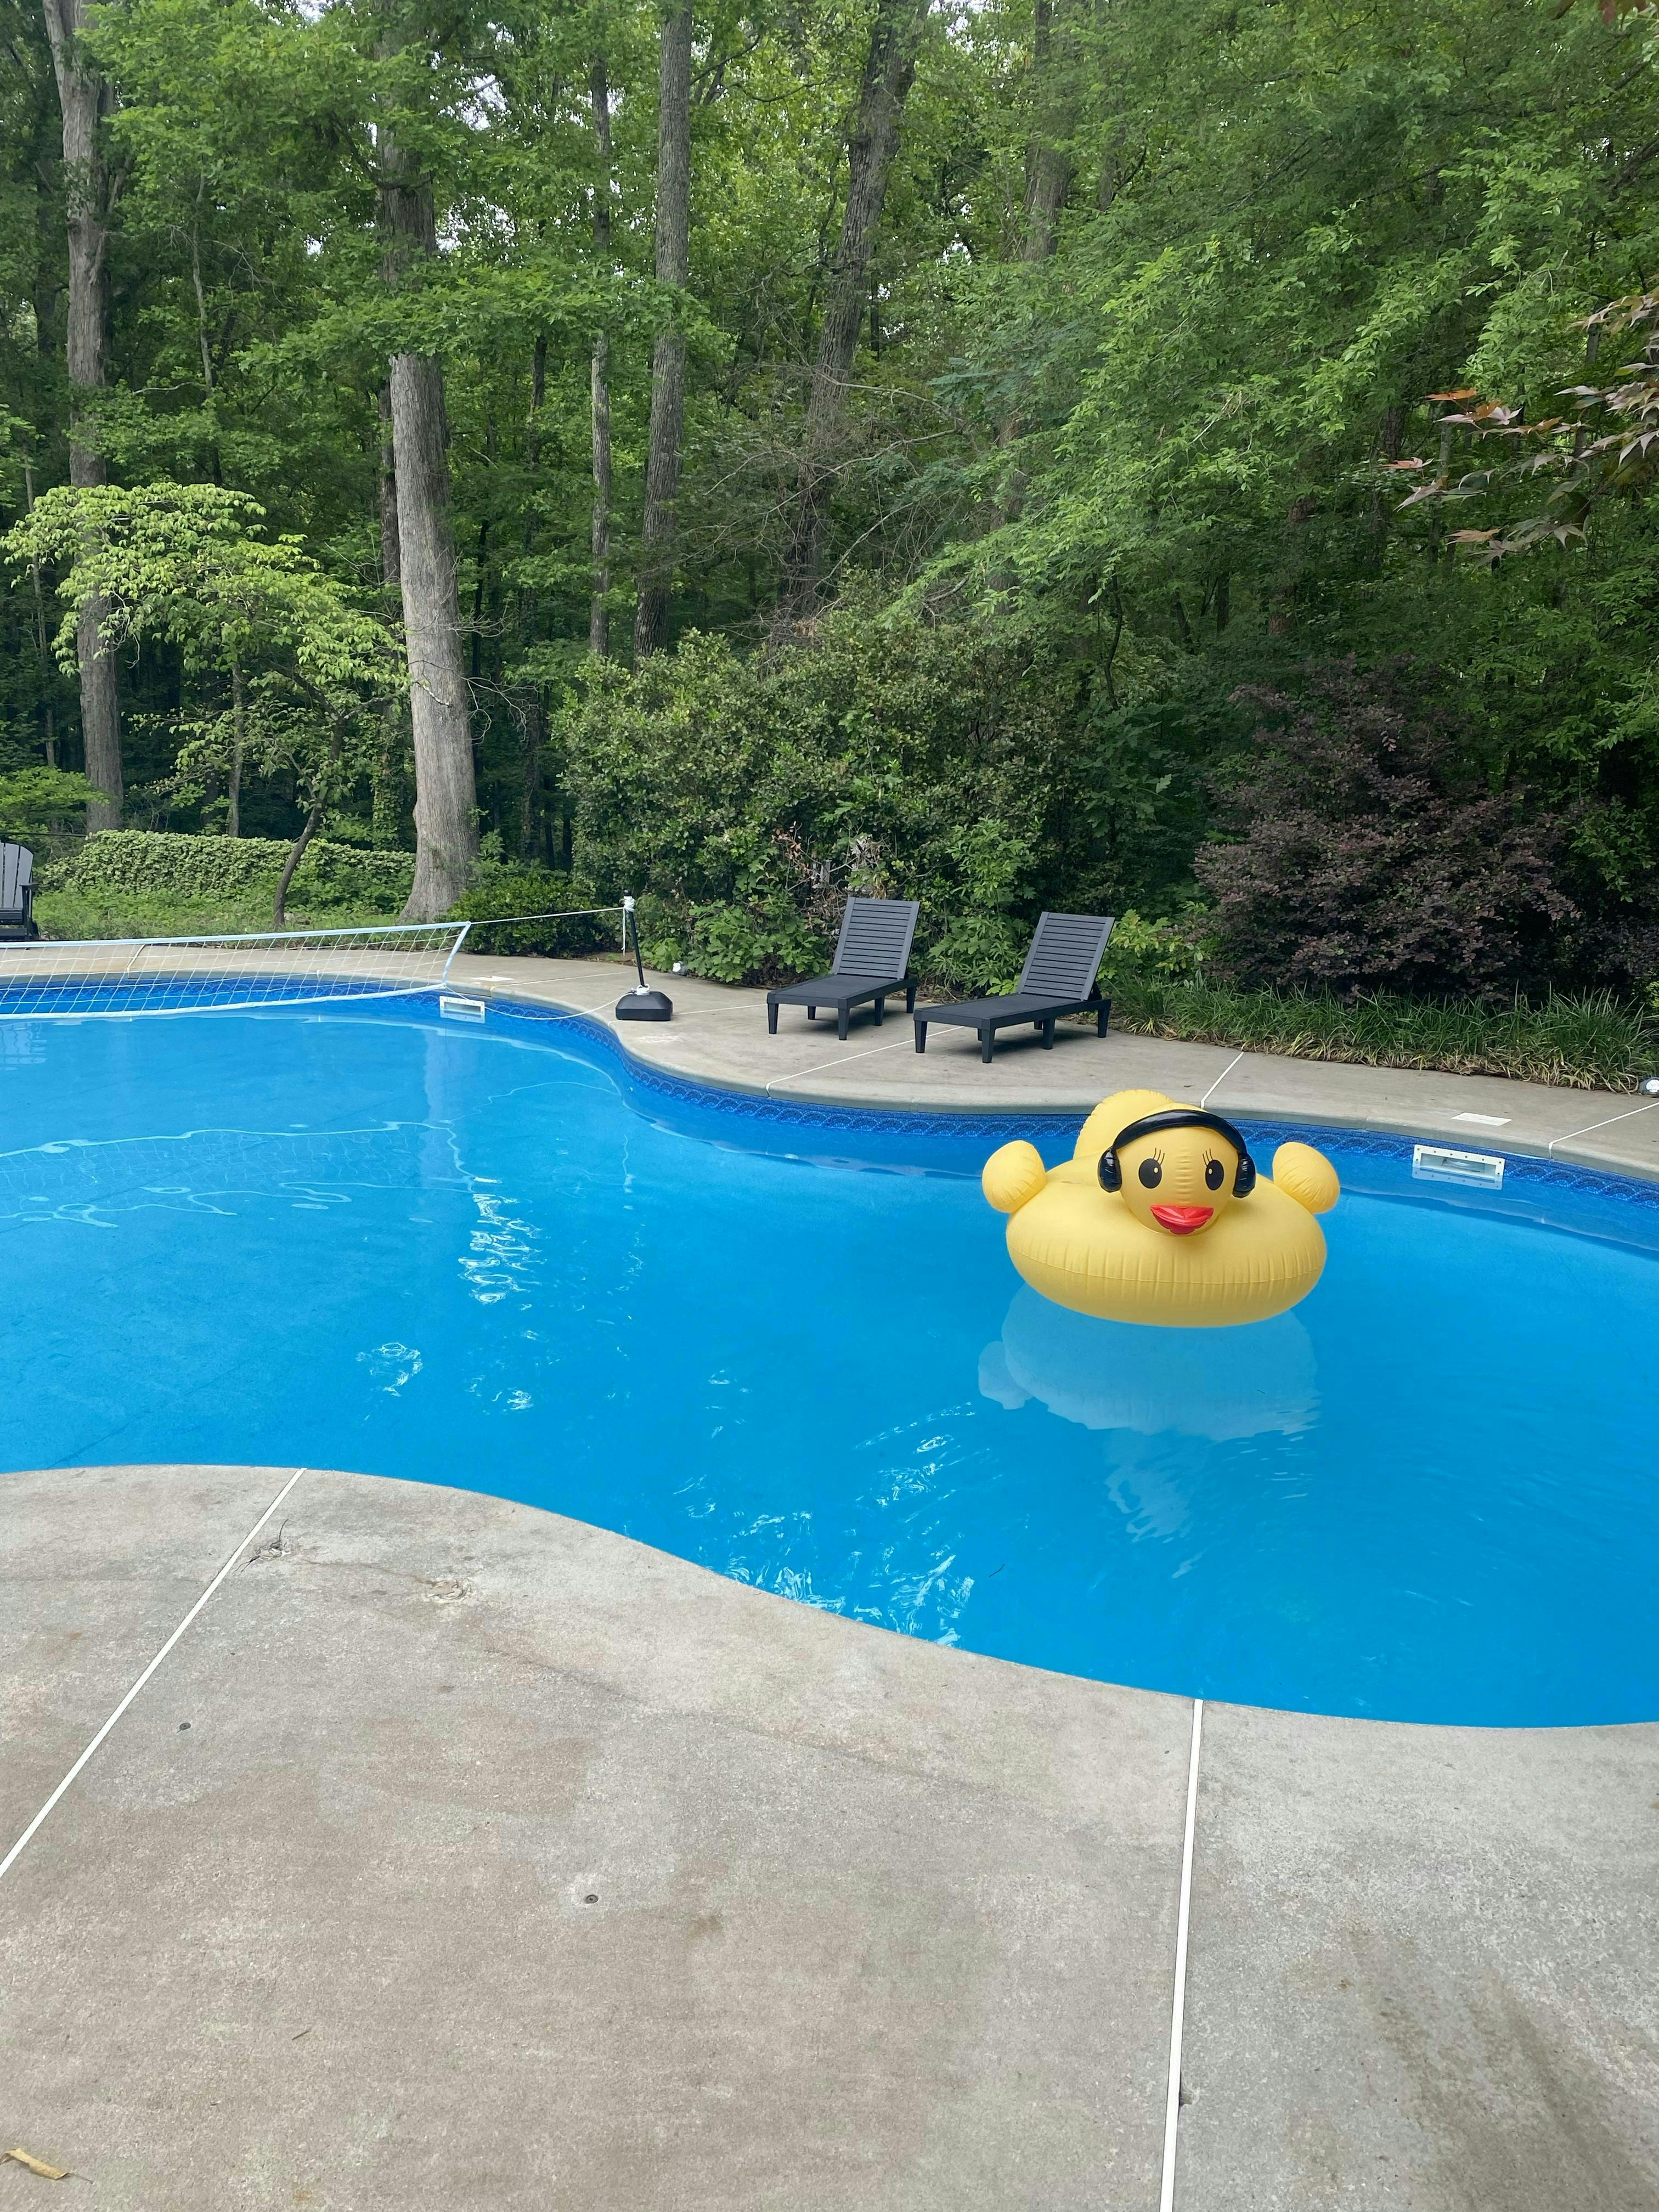 It’s a Private Pool Party, Ya’ll!!!